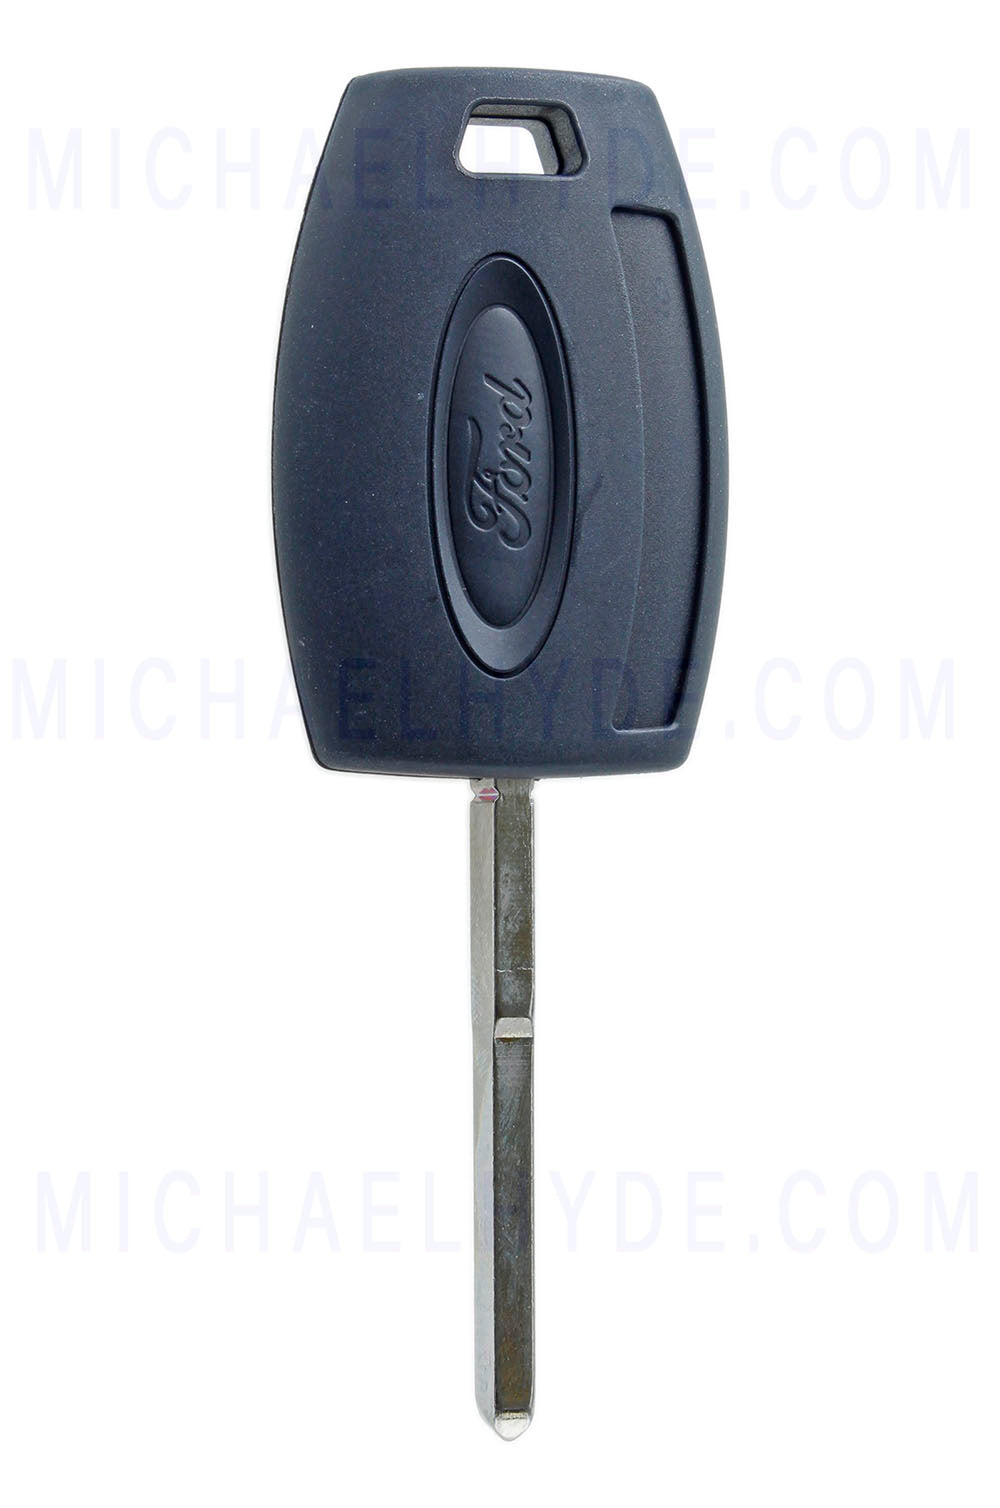 2019+ Ford Ranger Master Key (non-remote) Ford Logo - Strattec 5938555 - 2 Track HU101 - 128 bit - Philips 49 - OE# 164-R8253